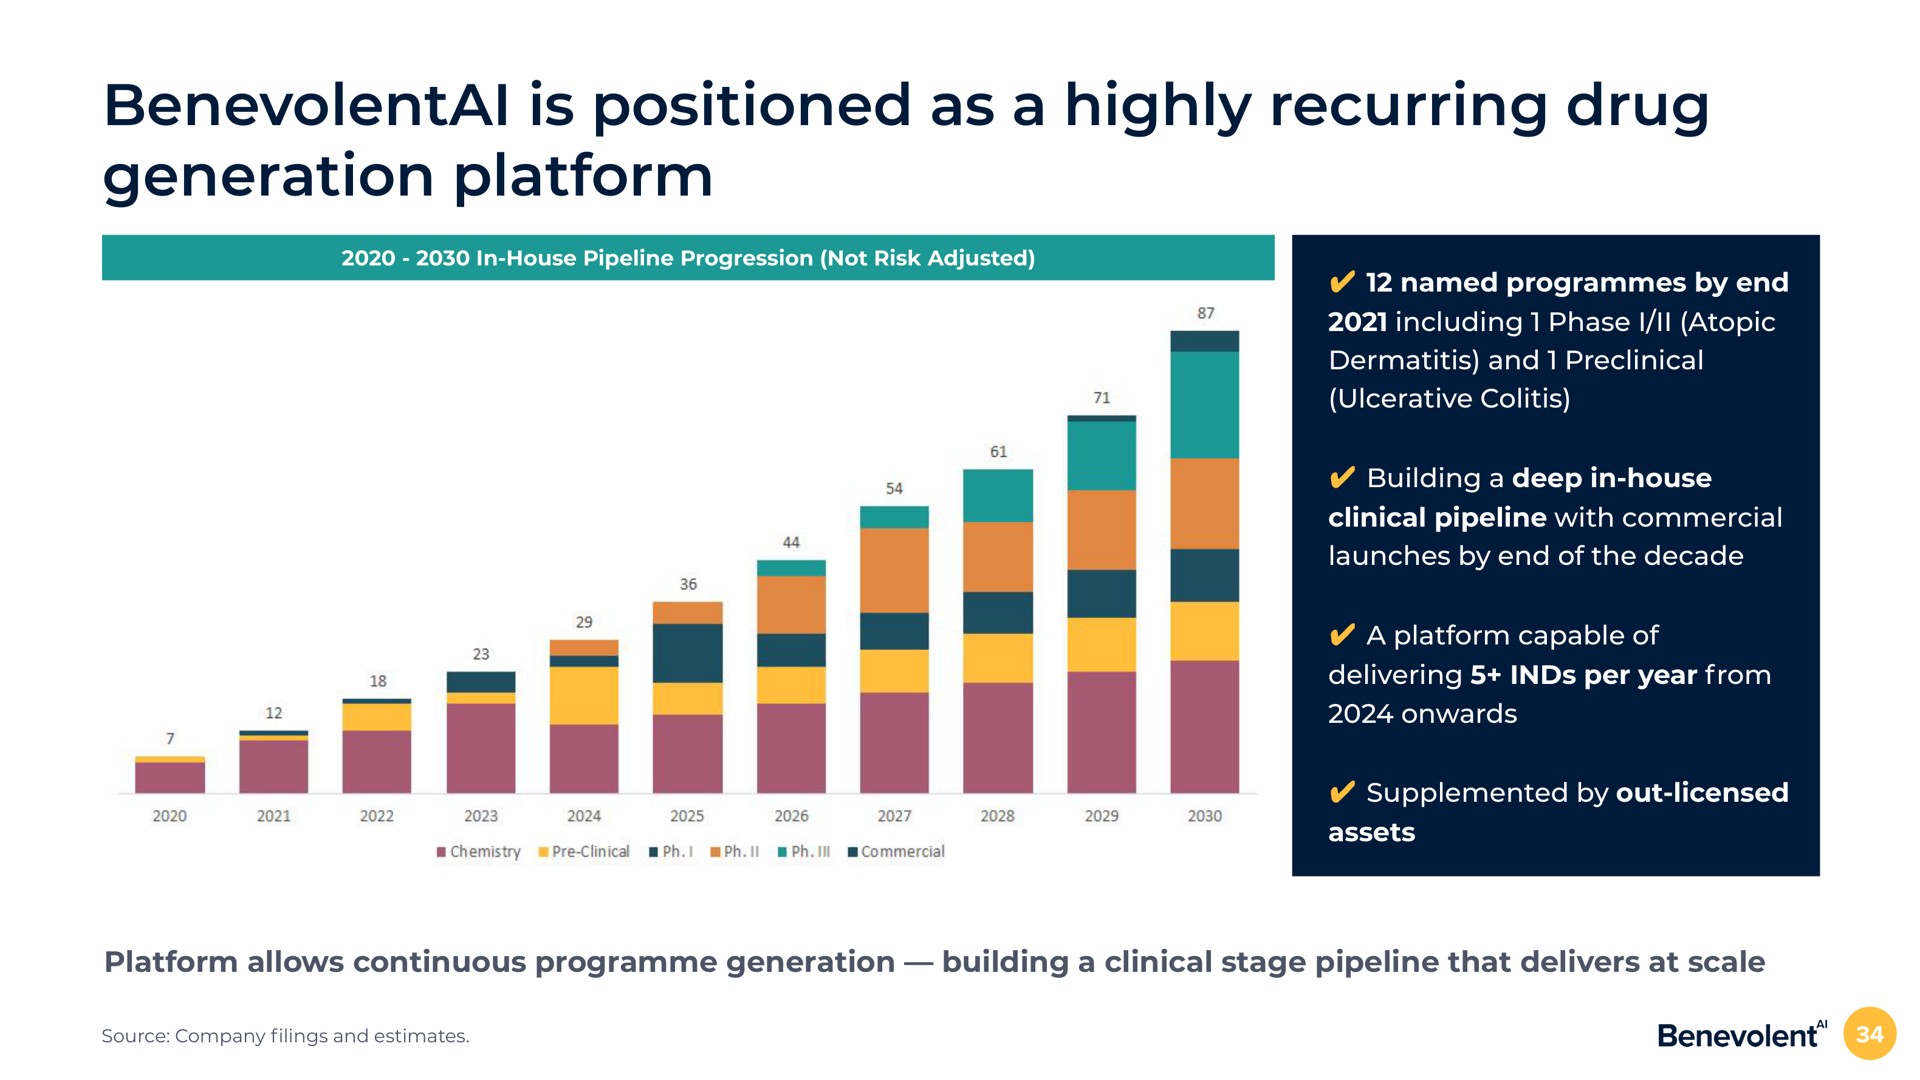 is positioned as a highly recurring drug generation platform named programmes by end including phase i atopic dermatitis and preclinical ulcerative colitis building a deep in house clinical pipeline with commercial launches by end of the decade a platform capable of delivering per year from onwards supplemented by out licensed assets platform allows continuous generation building a clinical stage pipeline that delivers at scale | BenevolentAI